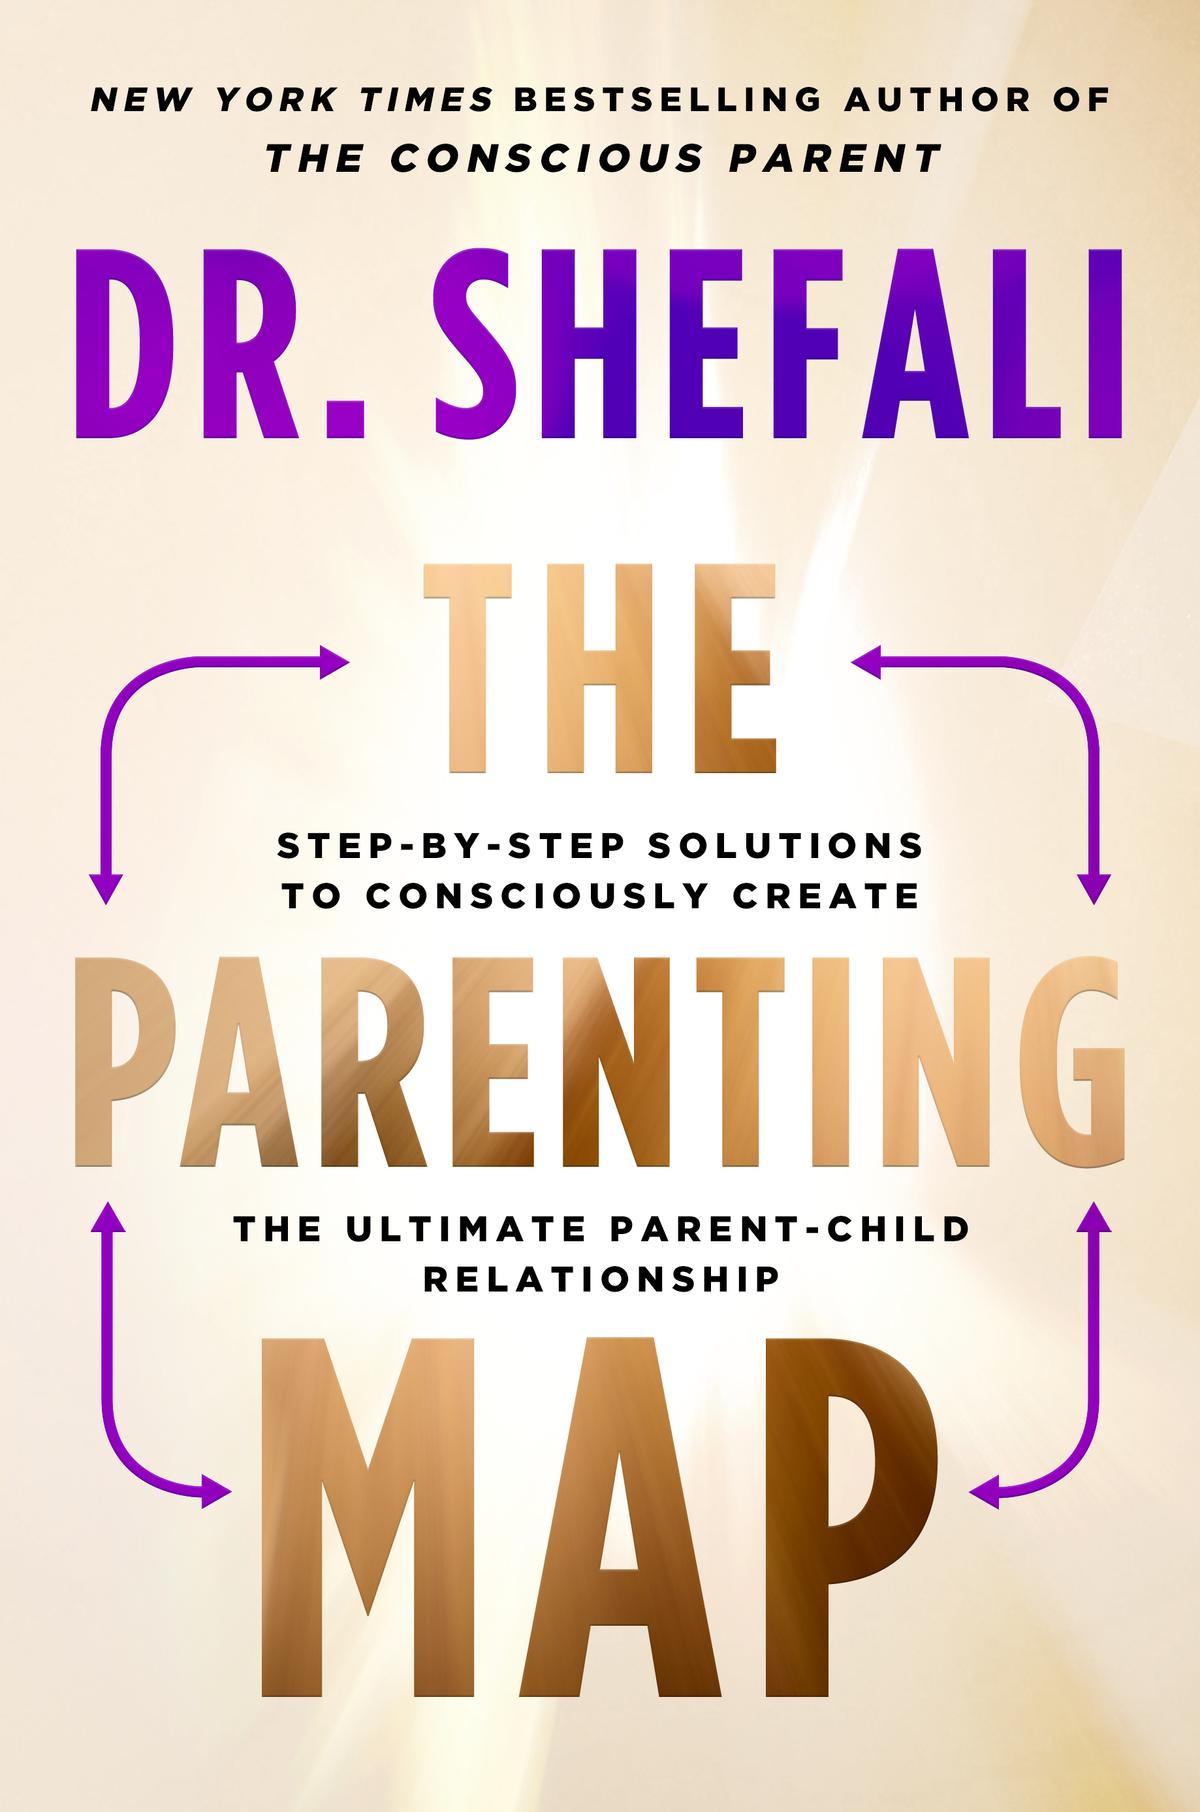 "The Parenting Map" by Dr. Shefali.